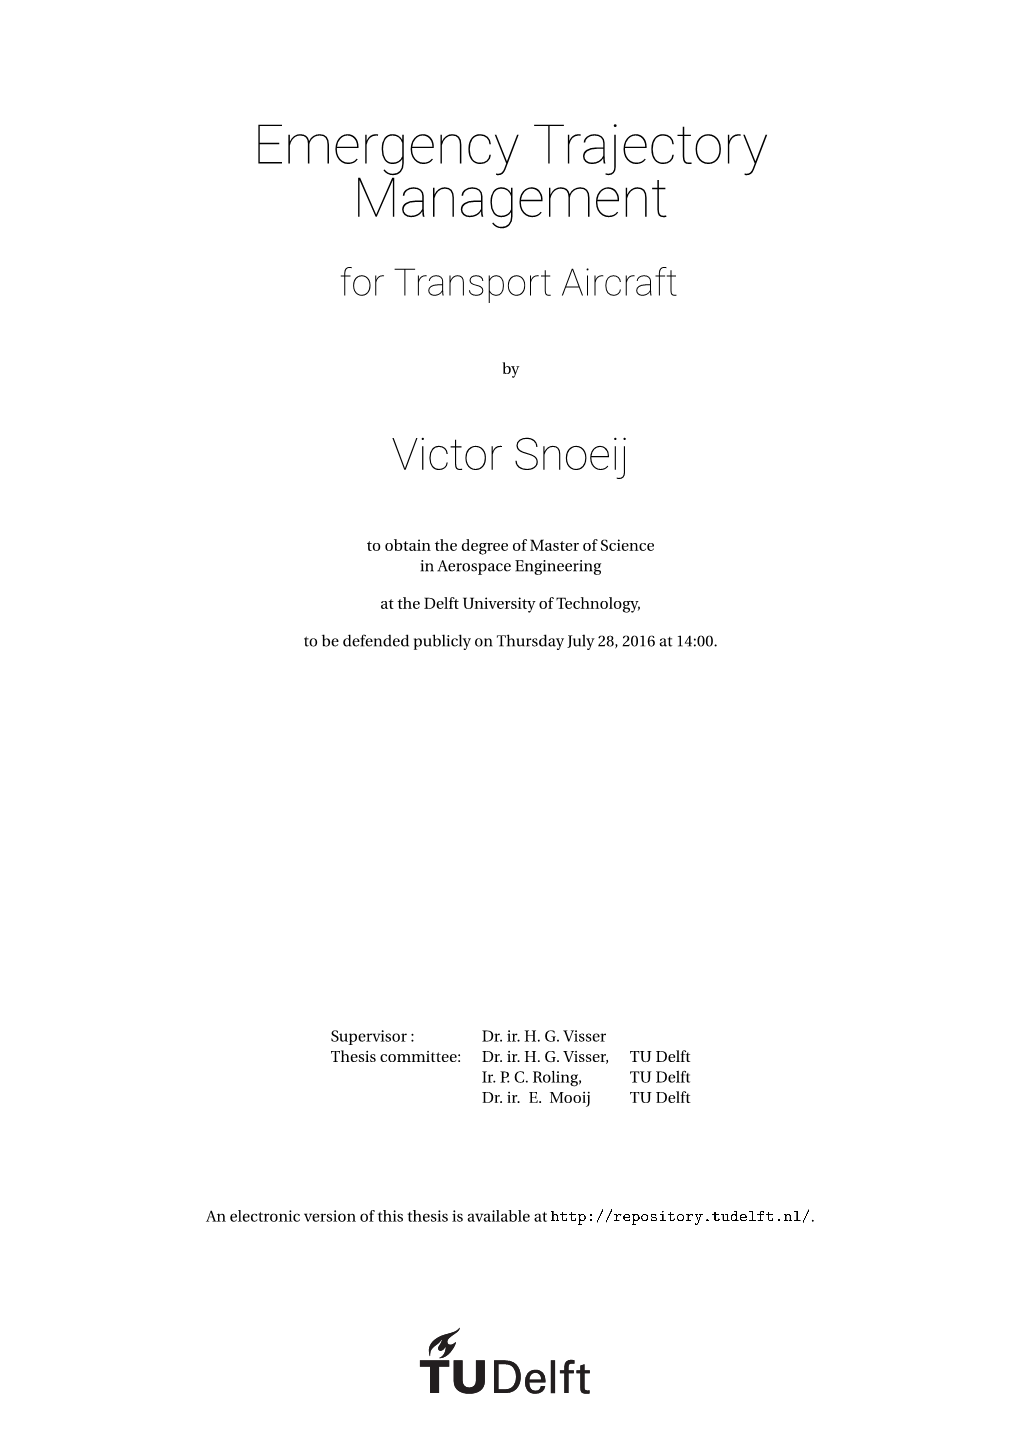 Emergency Trajectory Management for Transport Aircraft